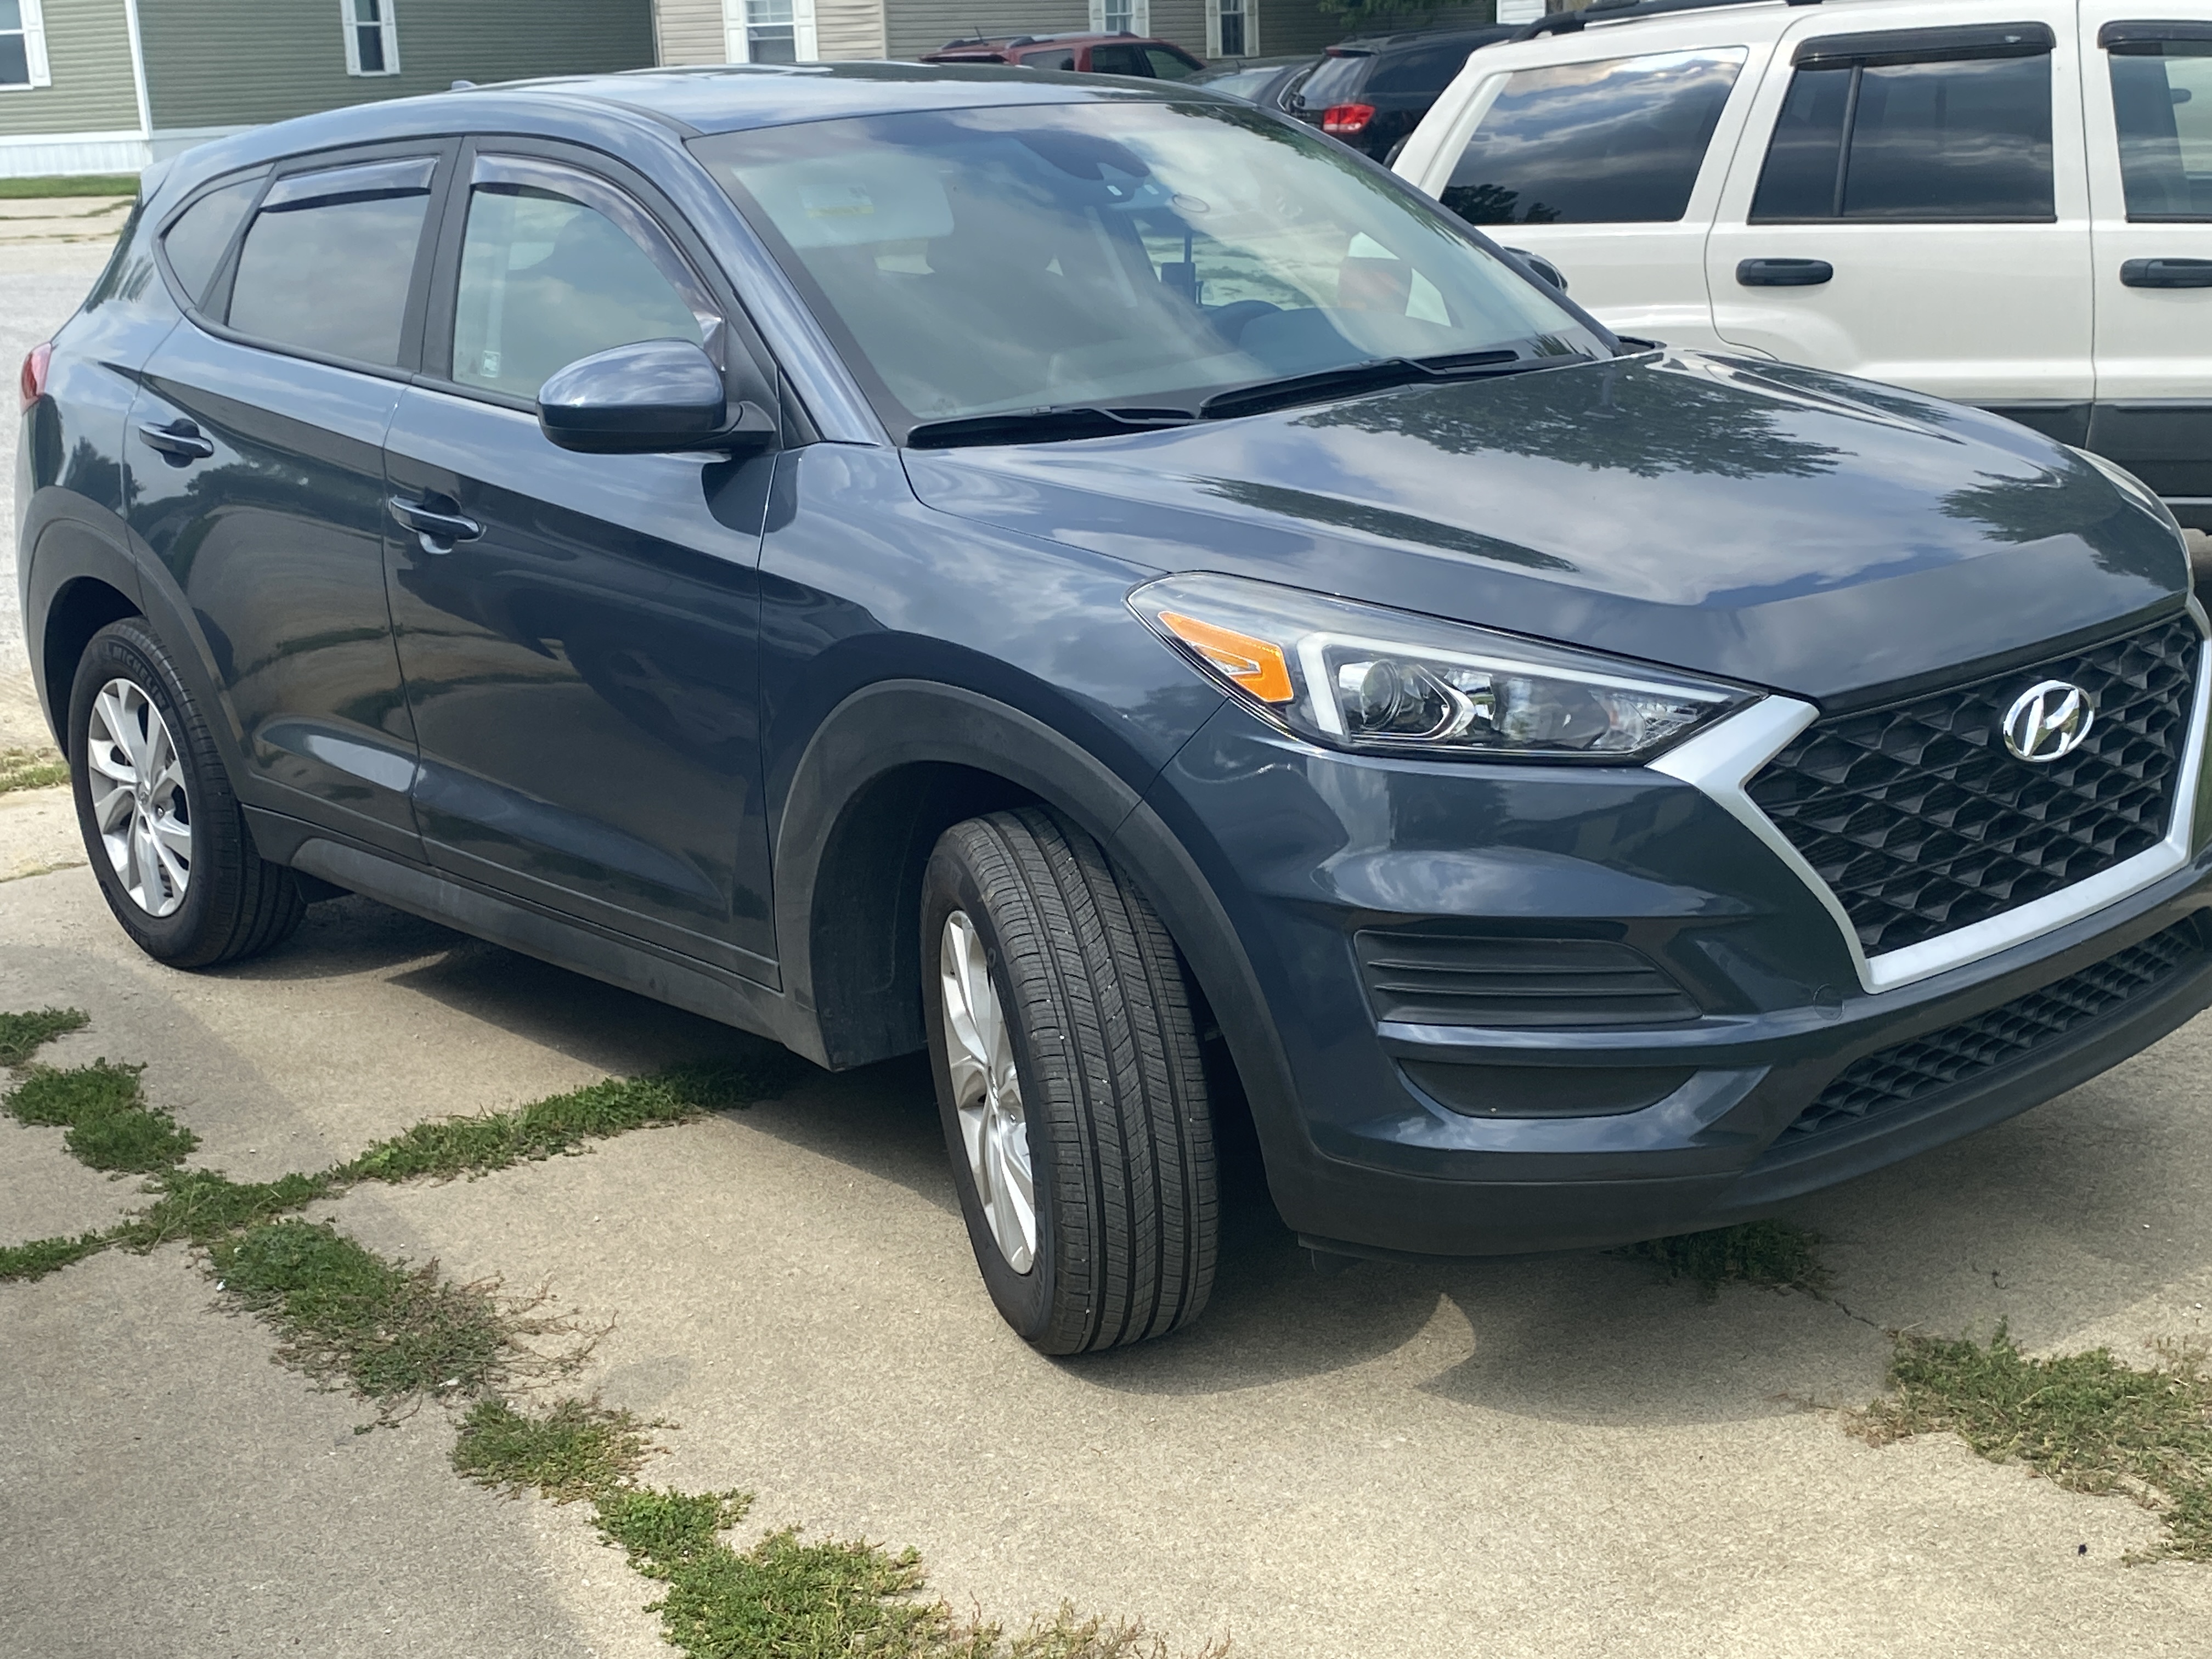 Used 2019 Hyundai Tucson for Sale Right Now - Autotrader